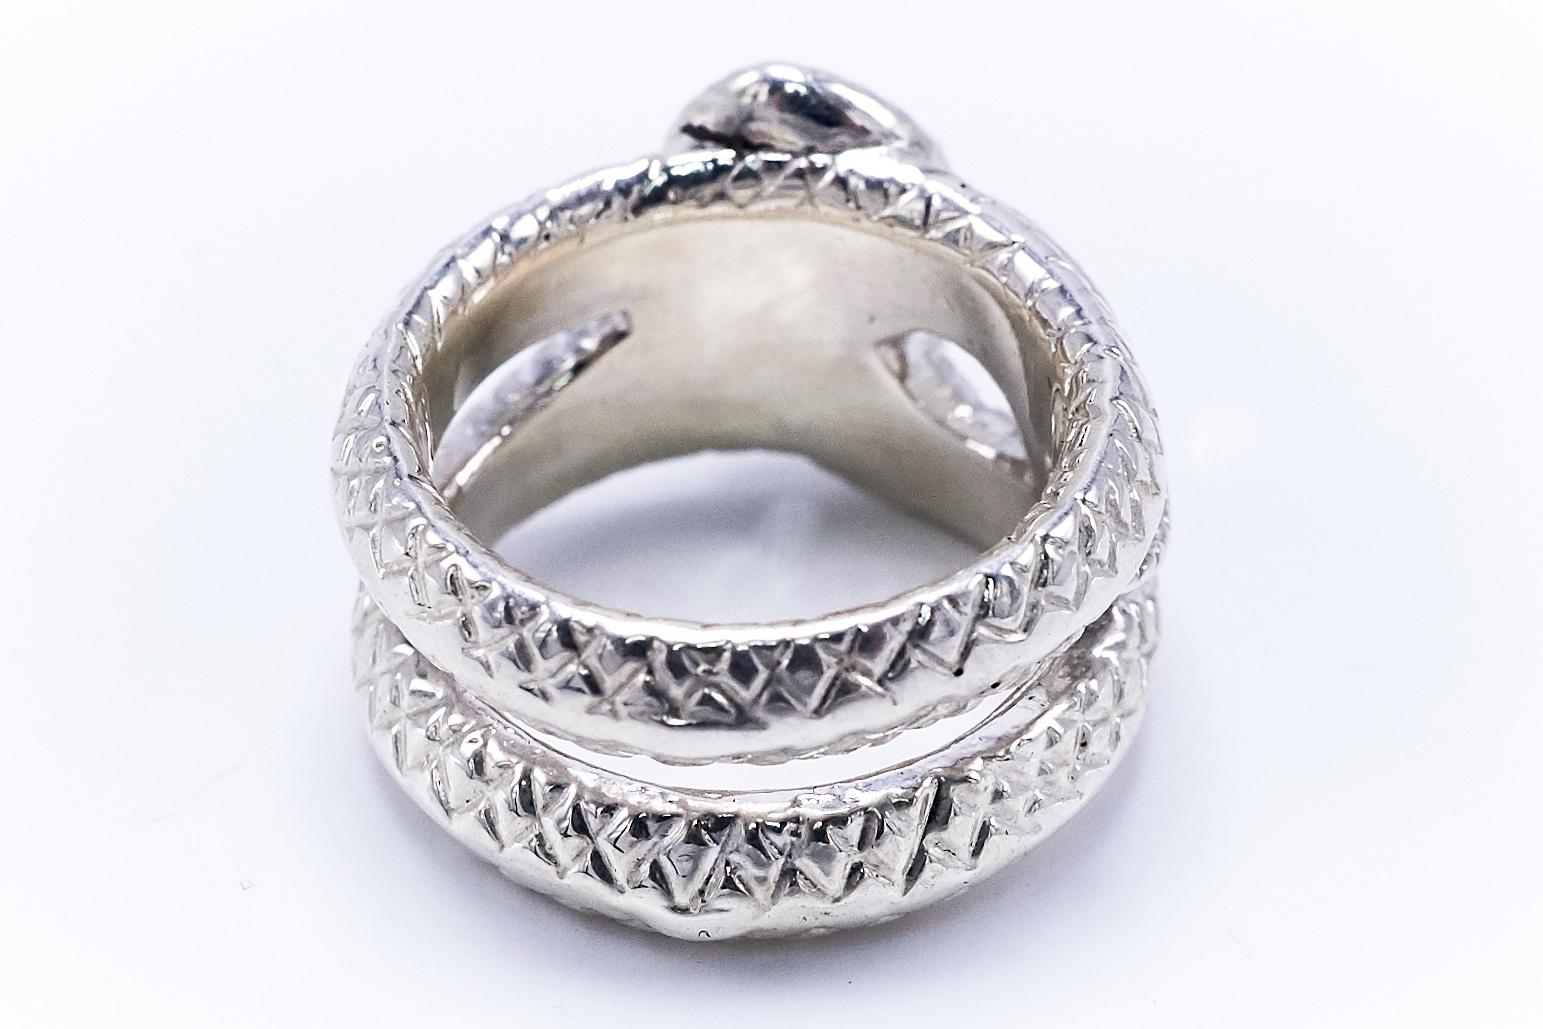 Brilliant Cut Snake Ring Black Diamond Sterling Silver Cocktail Ring J Dauphin For Sale